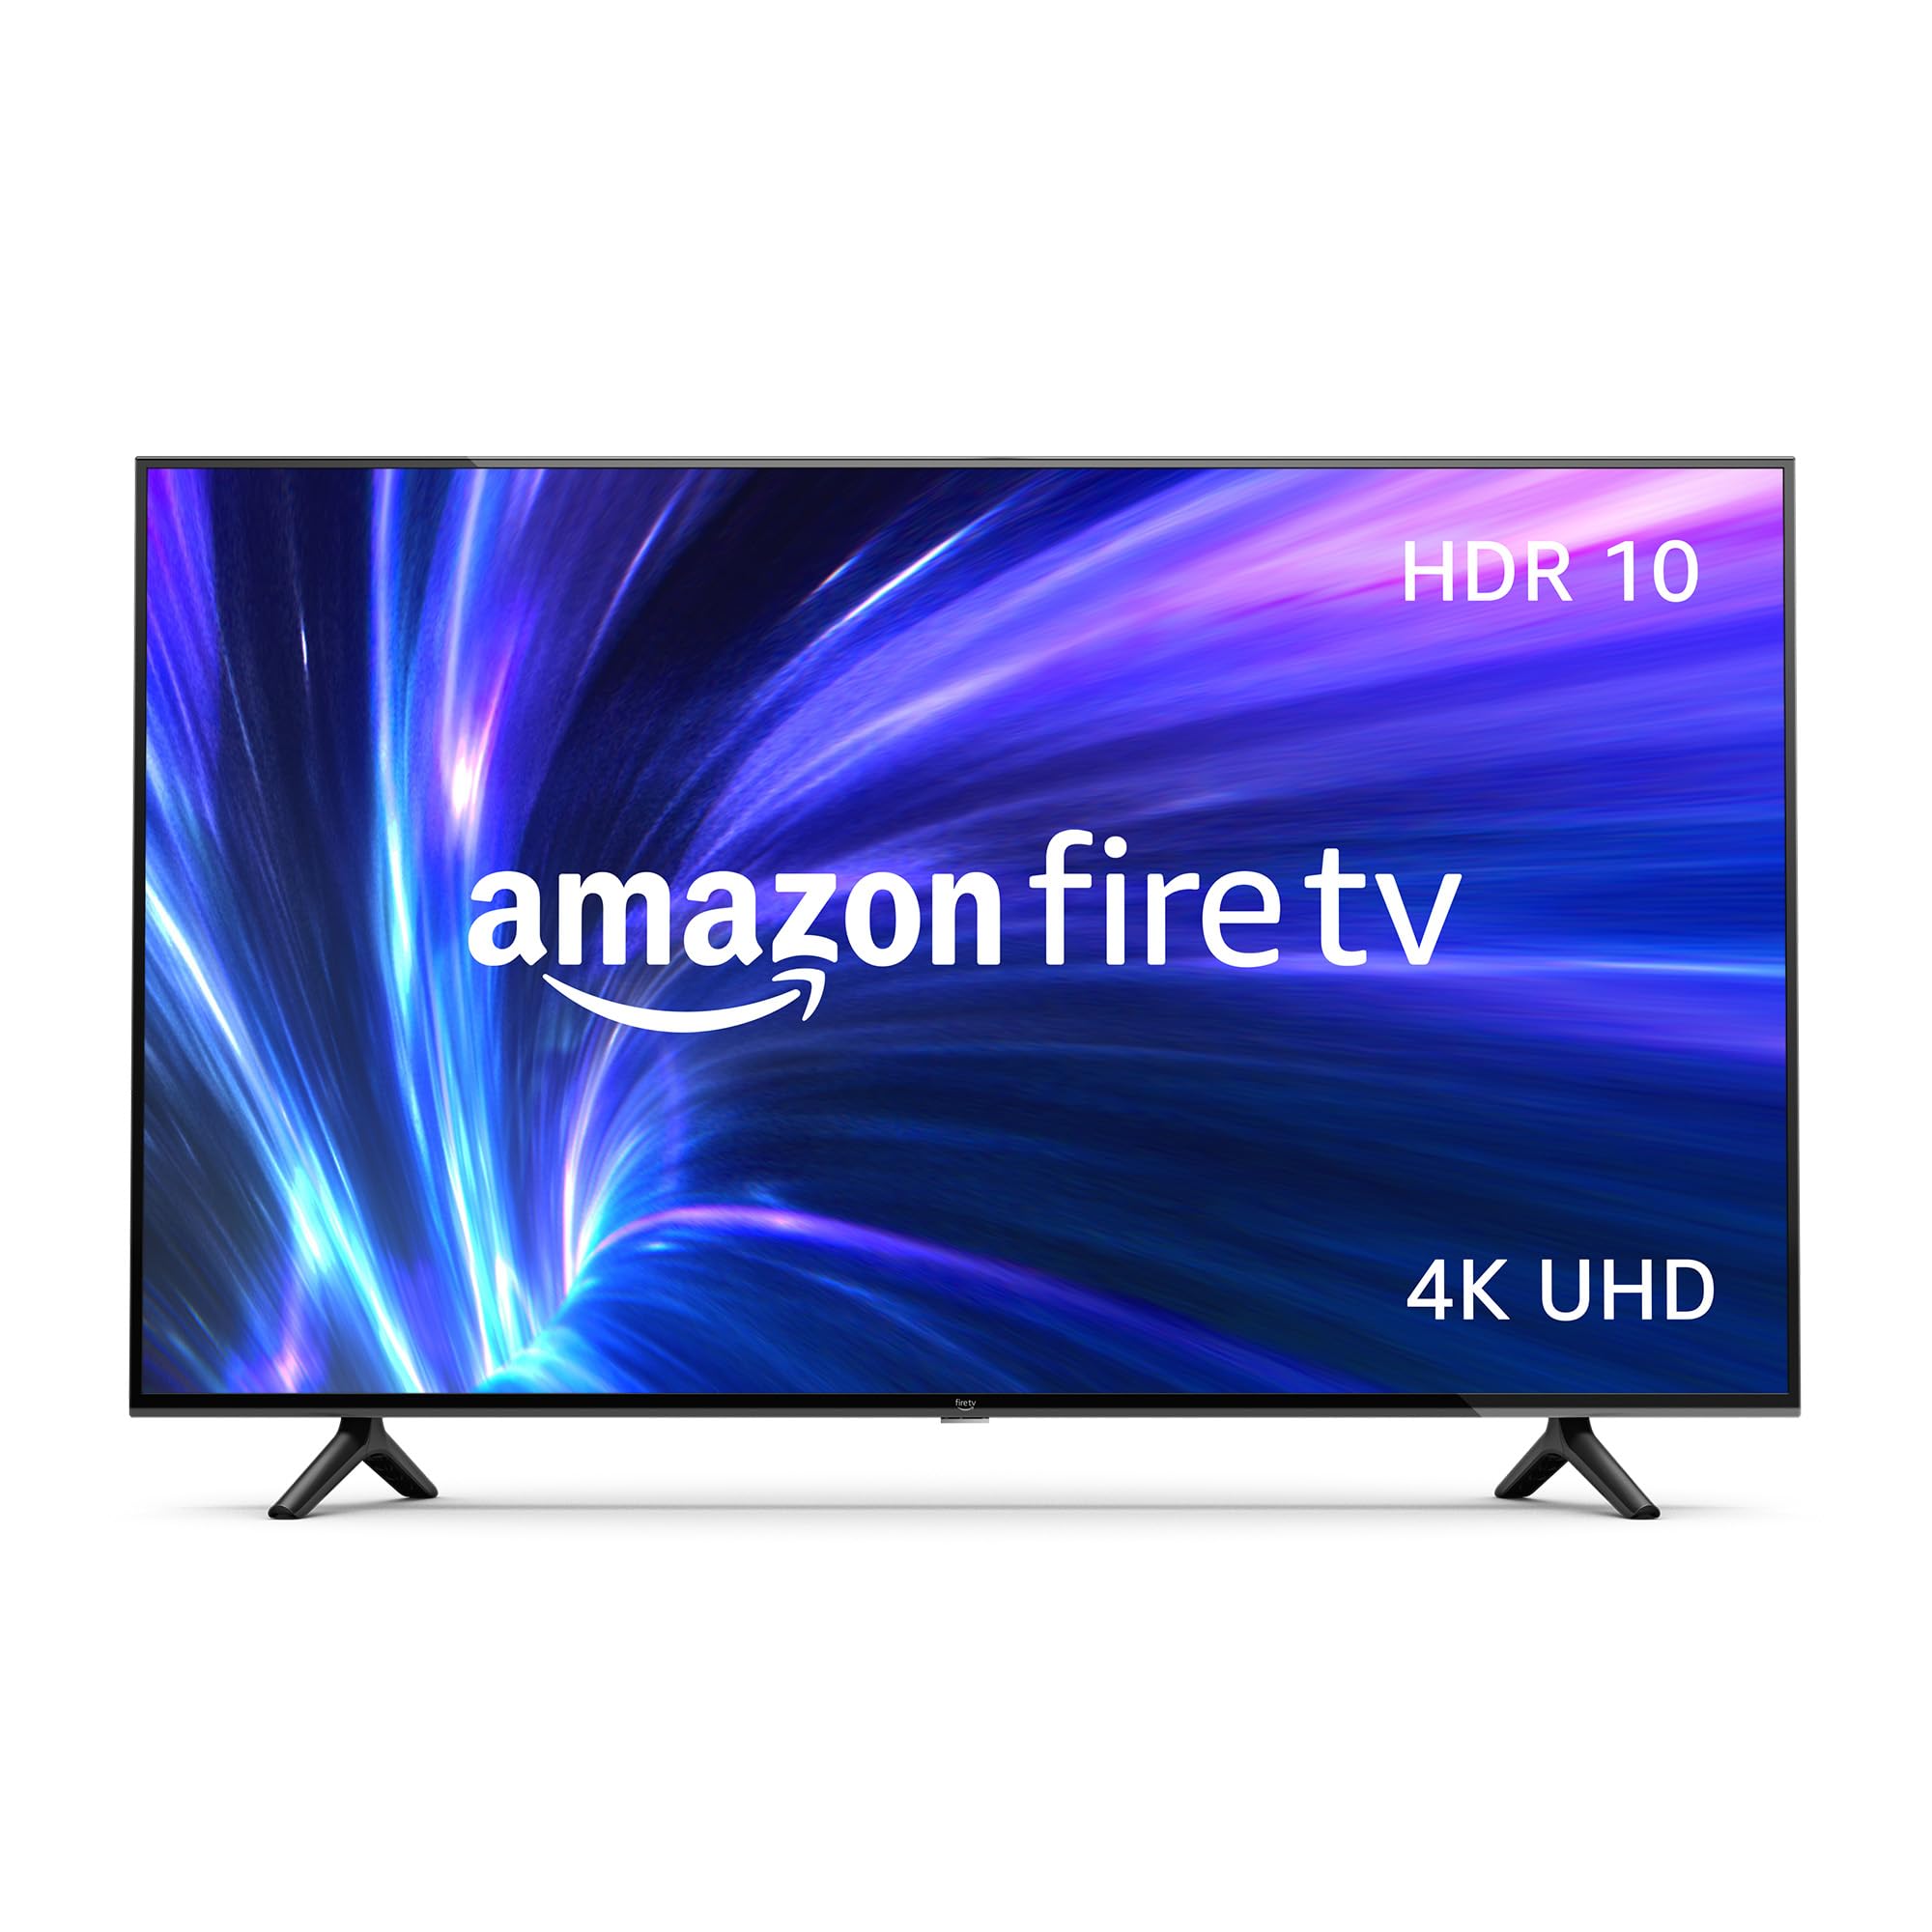 Amazon Fire TV 55" 4-Series 4K UHD smart TV, stream live TV without cable